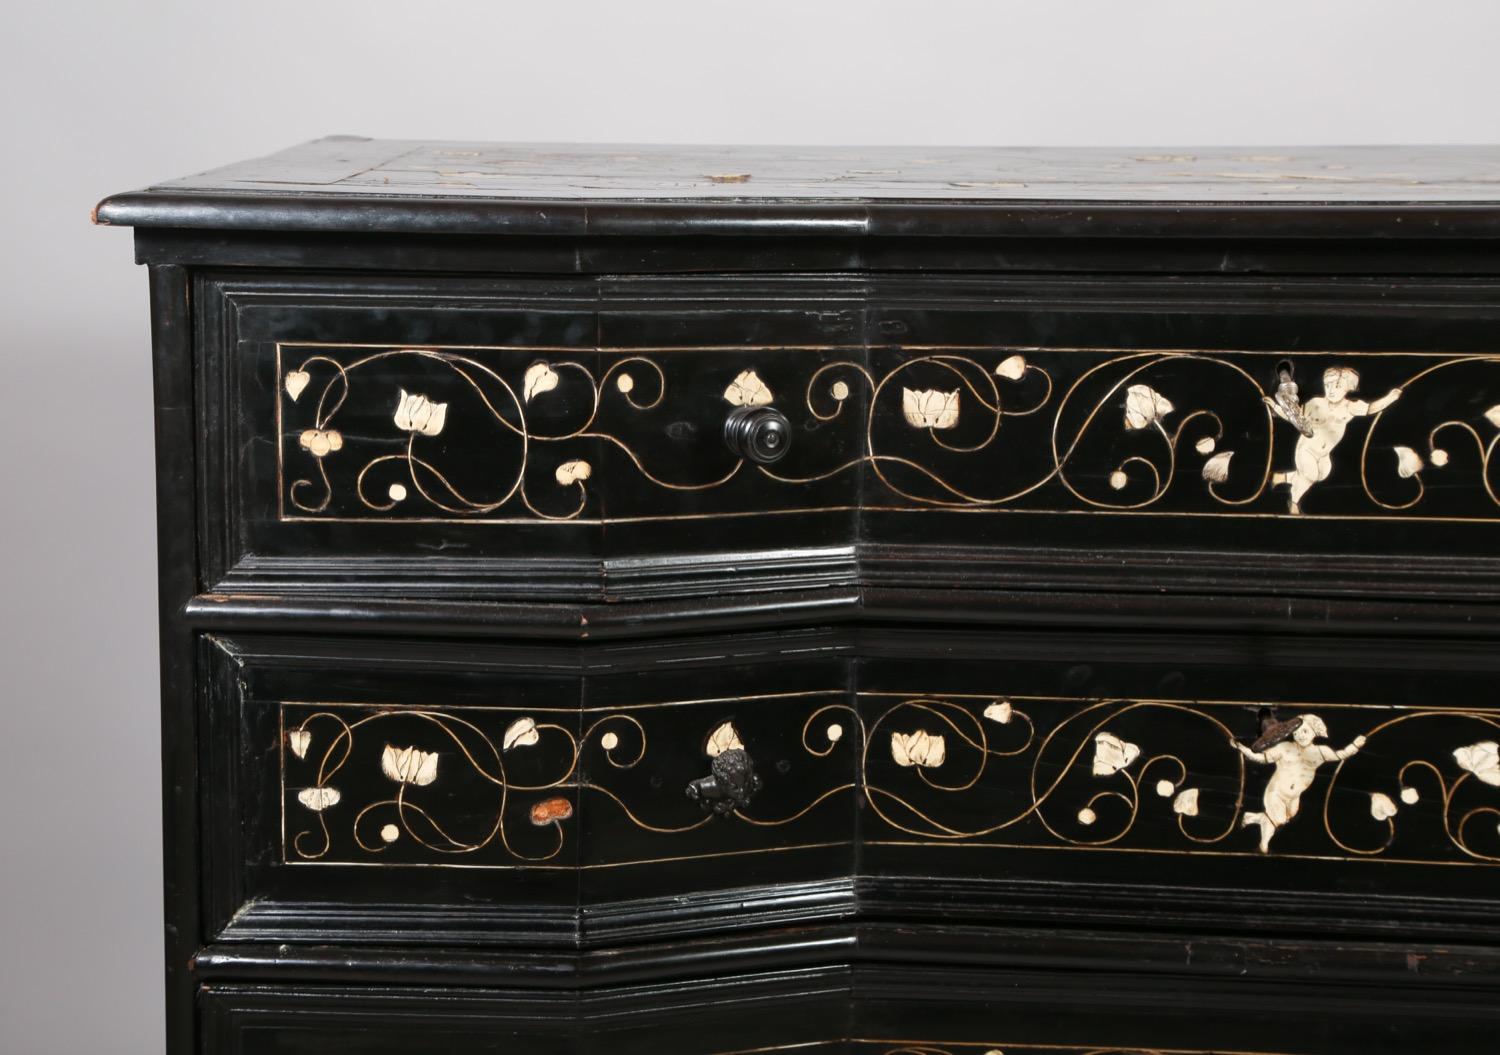 Very fine 17th century Italian, possibly Milanese, ebony commode inlaid with etched bone floral and figural decoration, the top drawer fitted as a secretary with walnut and fruitwood inlay and original wrought iron hardware, the case with concave